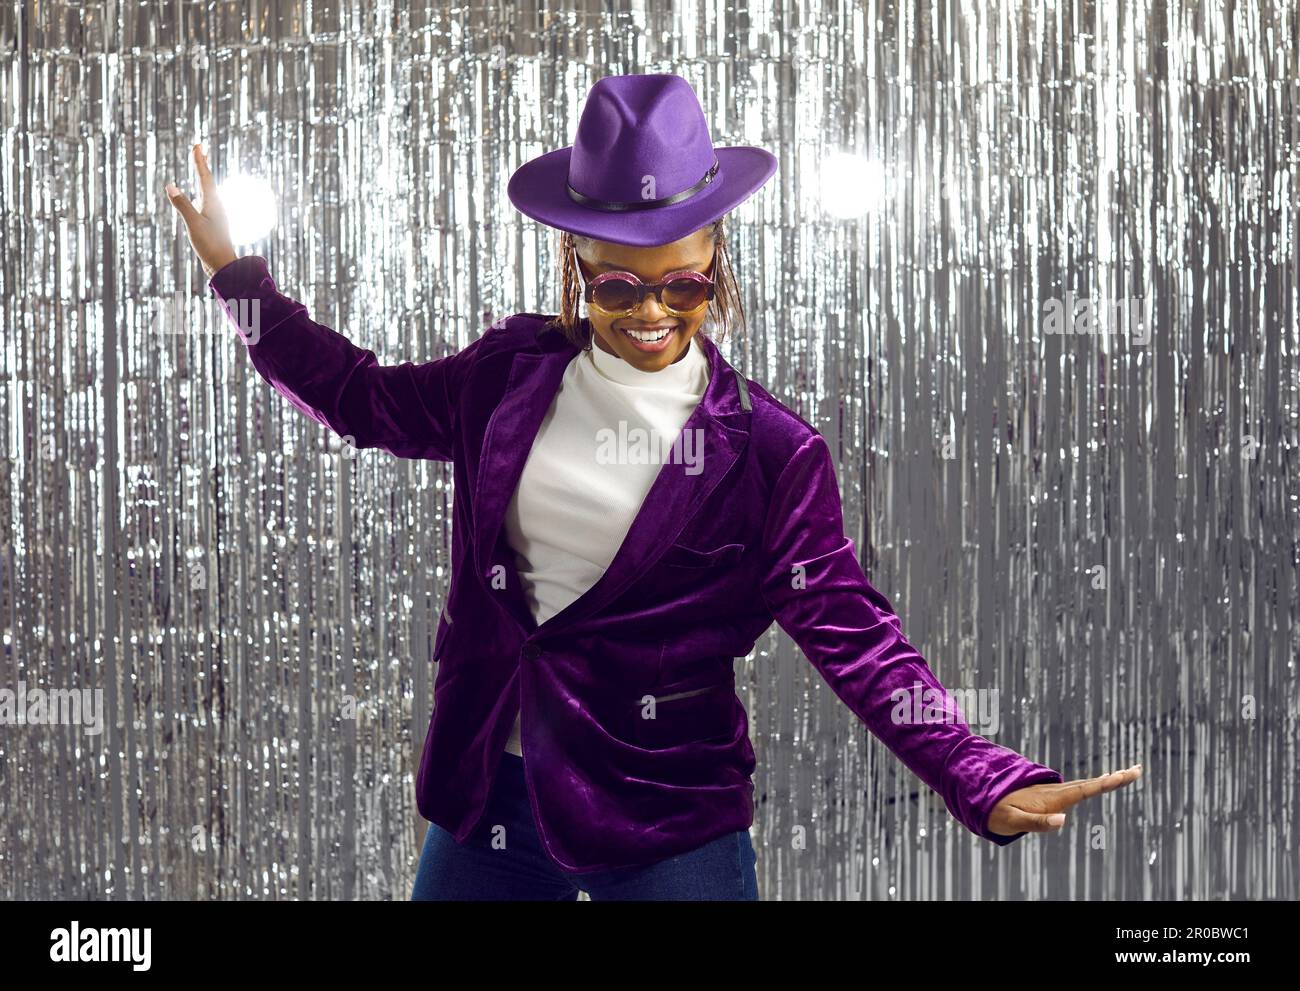 Happy confident young black woman in a purple hat, jacket and glasses dancing at a party Stock Photo